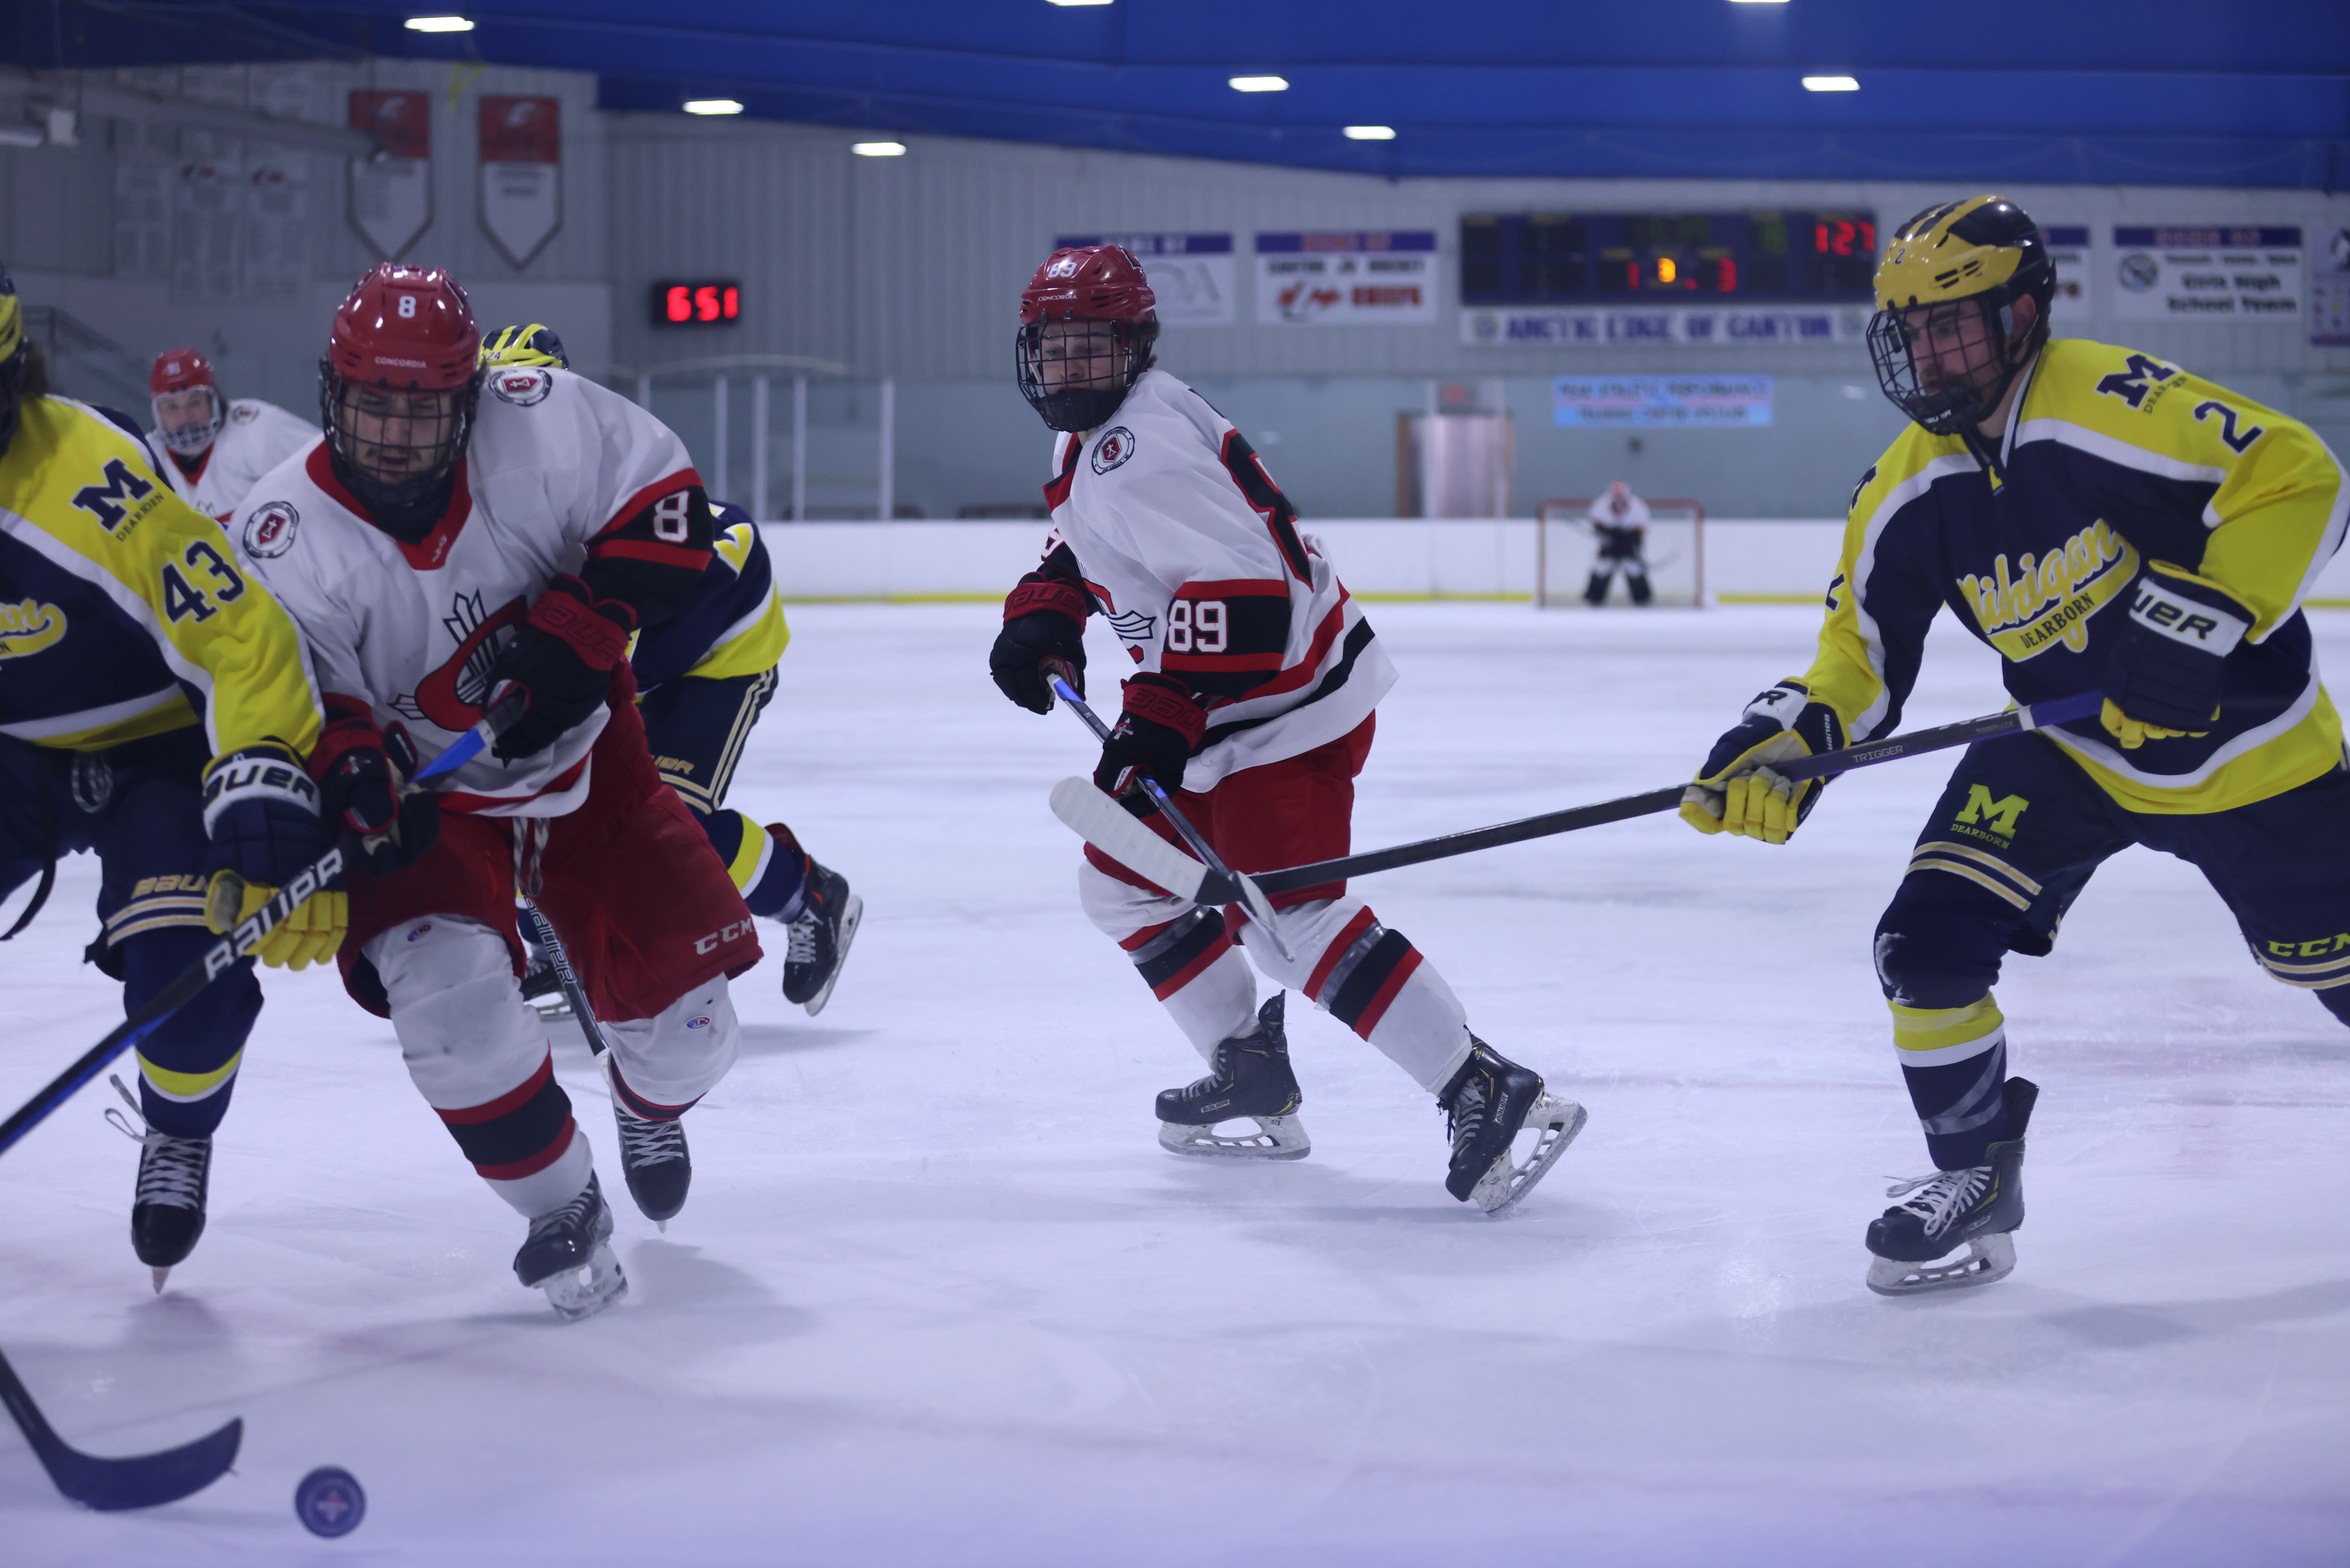 Men's Hockey falls 7-3 to Cleary on Saturday